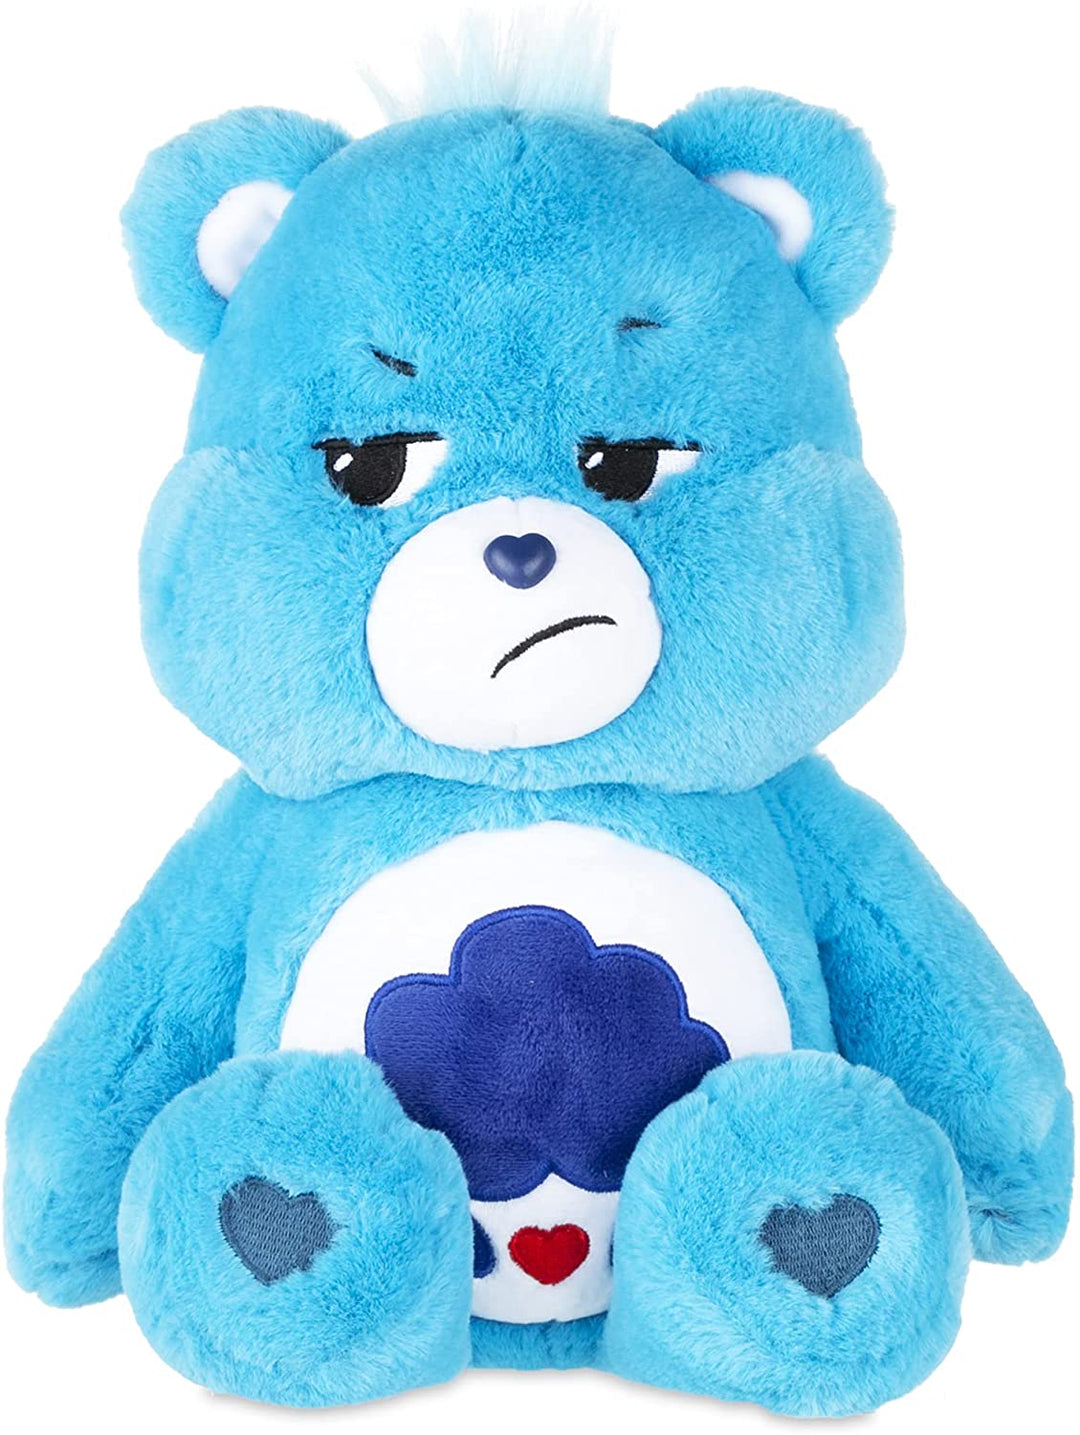 Care Bears 22062 14 Inch Medium Plush Grumpy Bear, Collectable Cute Plush Toy, Cuddly Toys for Children